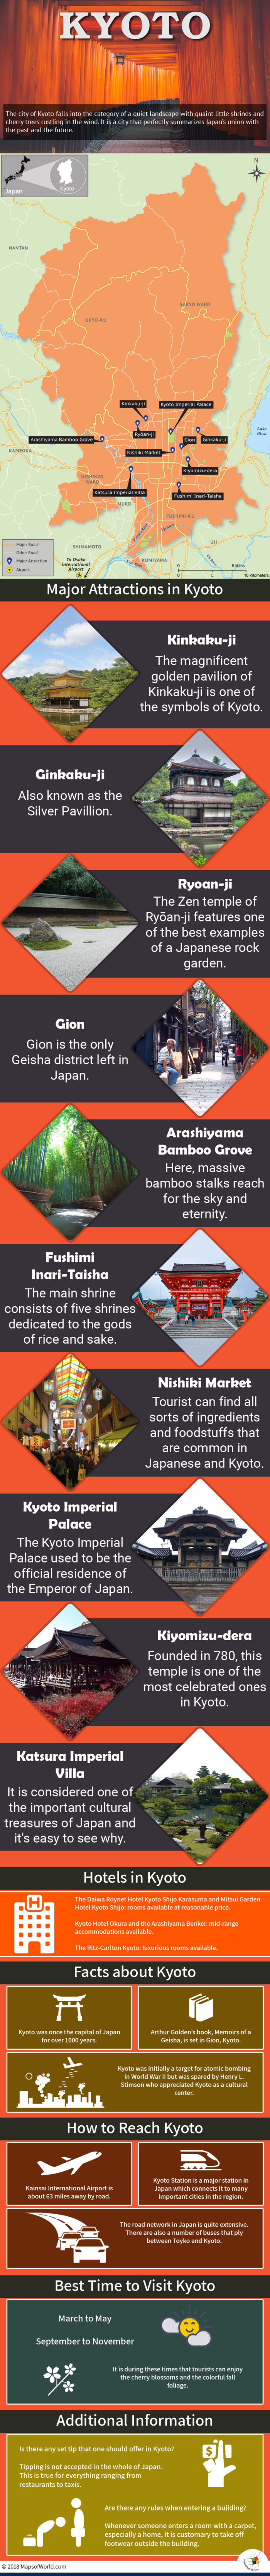 Infographic Depicting Kyoto Tourist Attractions